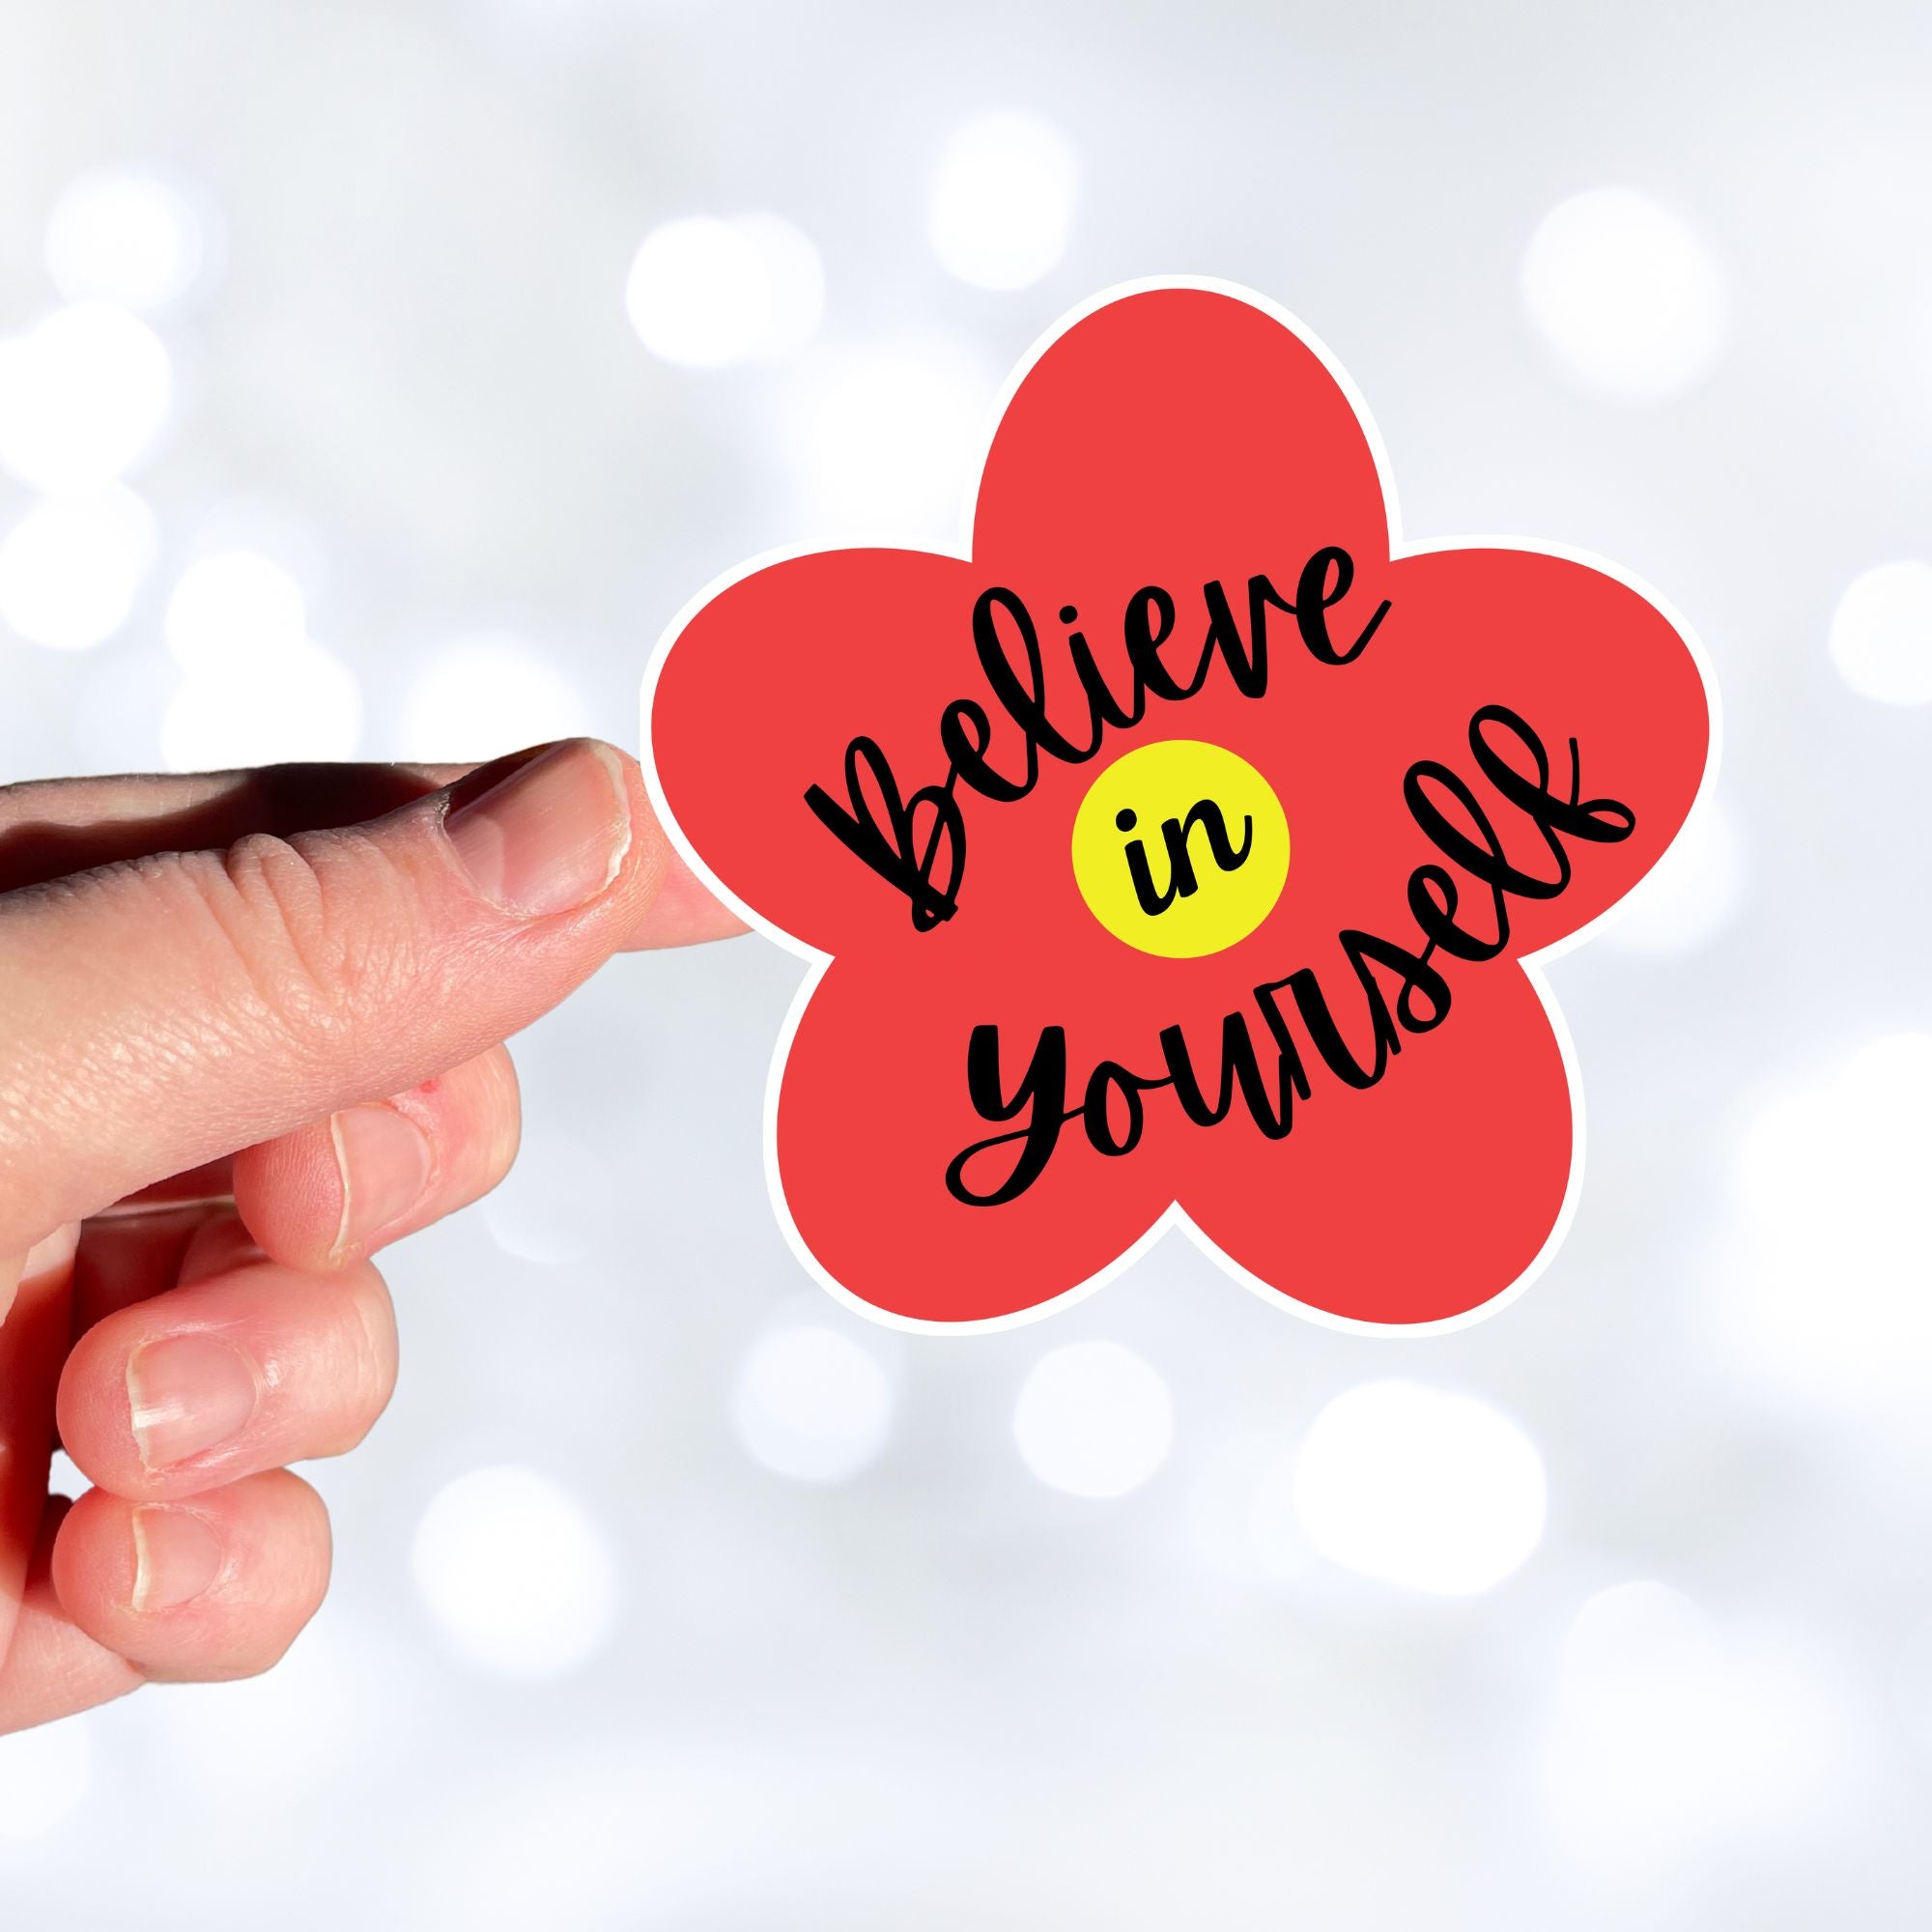 This inspirational individual die-cut sticker features a red flower with a yellow center, with the words Believe in Yourself written across it. Check out our Inspirational collection for more inspiring stickers! This image shows a hand holding the Believe in Yourself sticker.